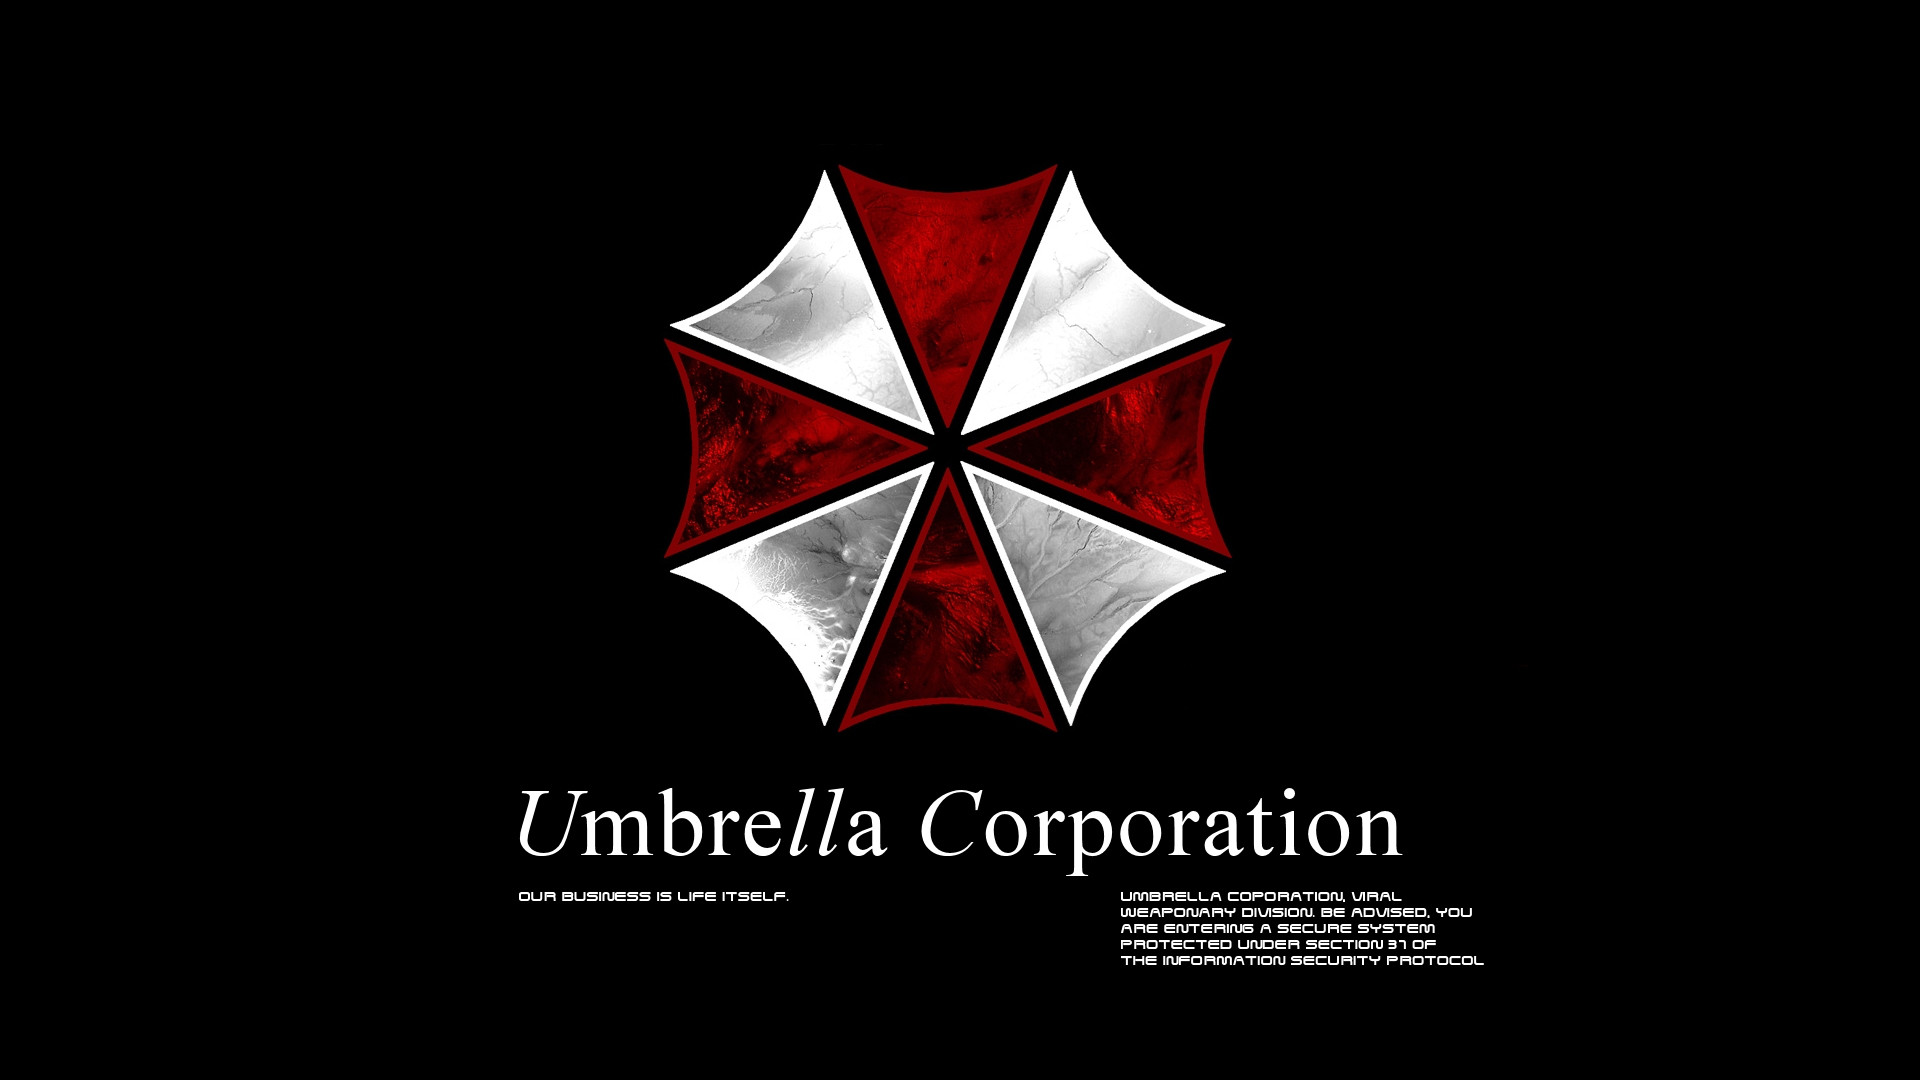 umbrella corp - Umbrella Corporation Our Business Is Life Itself. Umbrella Coporation, Viral Weaponary Division. Be Advised. You Are Entering A Secure System Protected Under Section 37 Of The Information Security Protocol